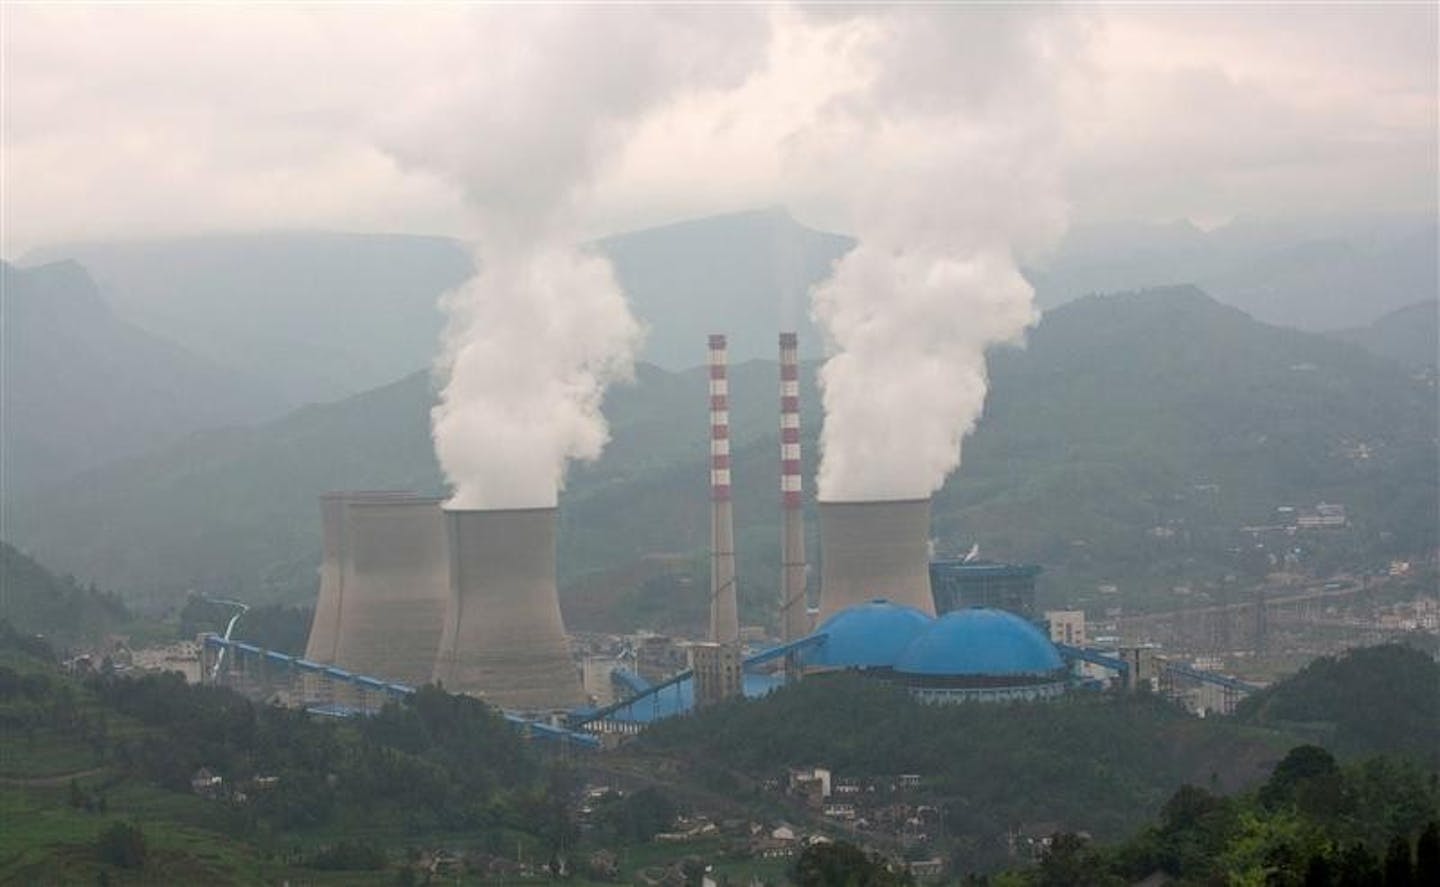 Air pollution concerns halt enormous coal plant in China Opinion